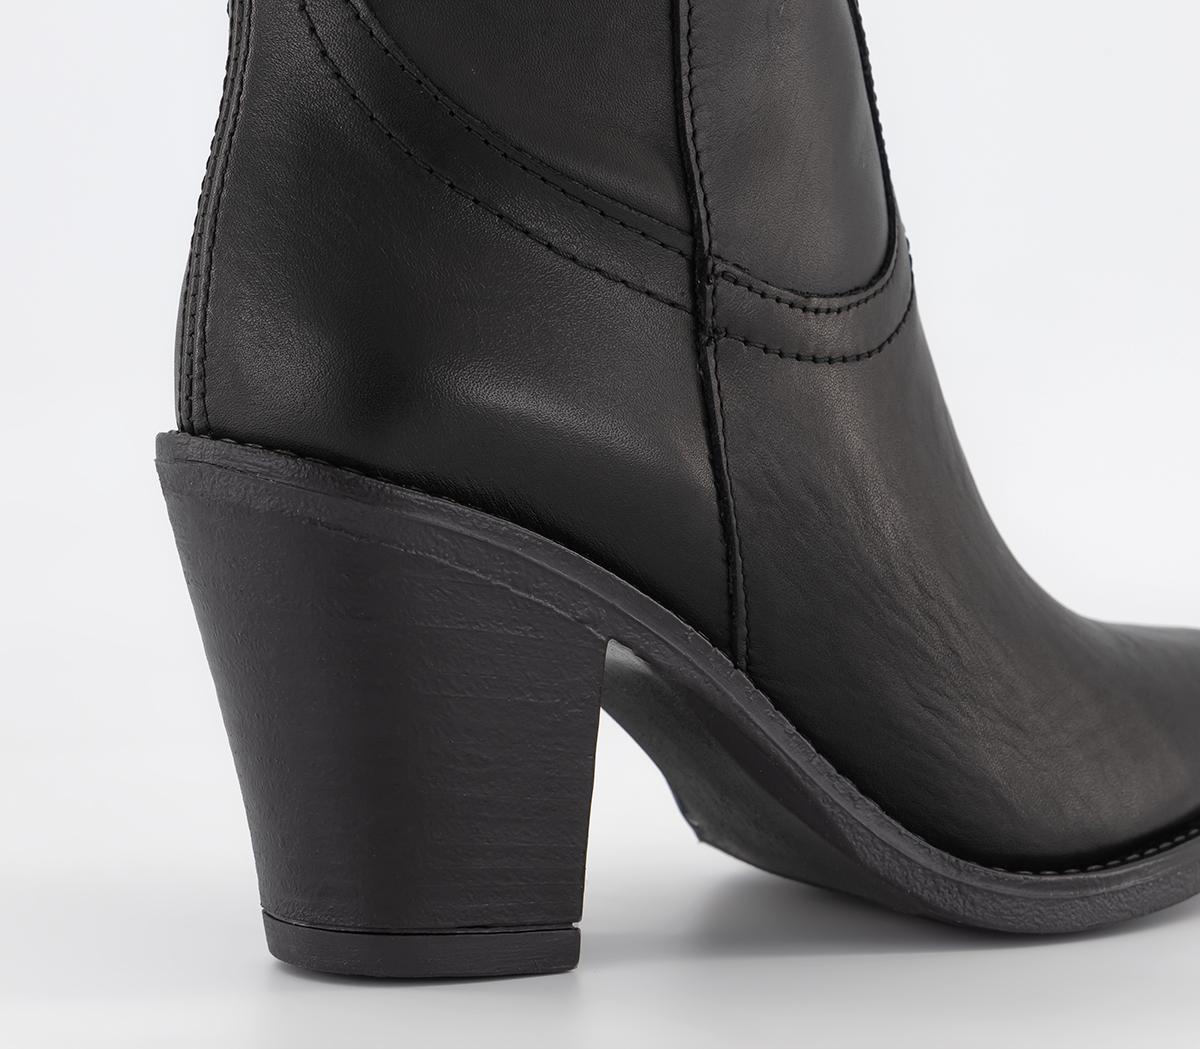 OFFICE Kennedy Western Calf Boots Black Leather - Knee High Boots